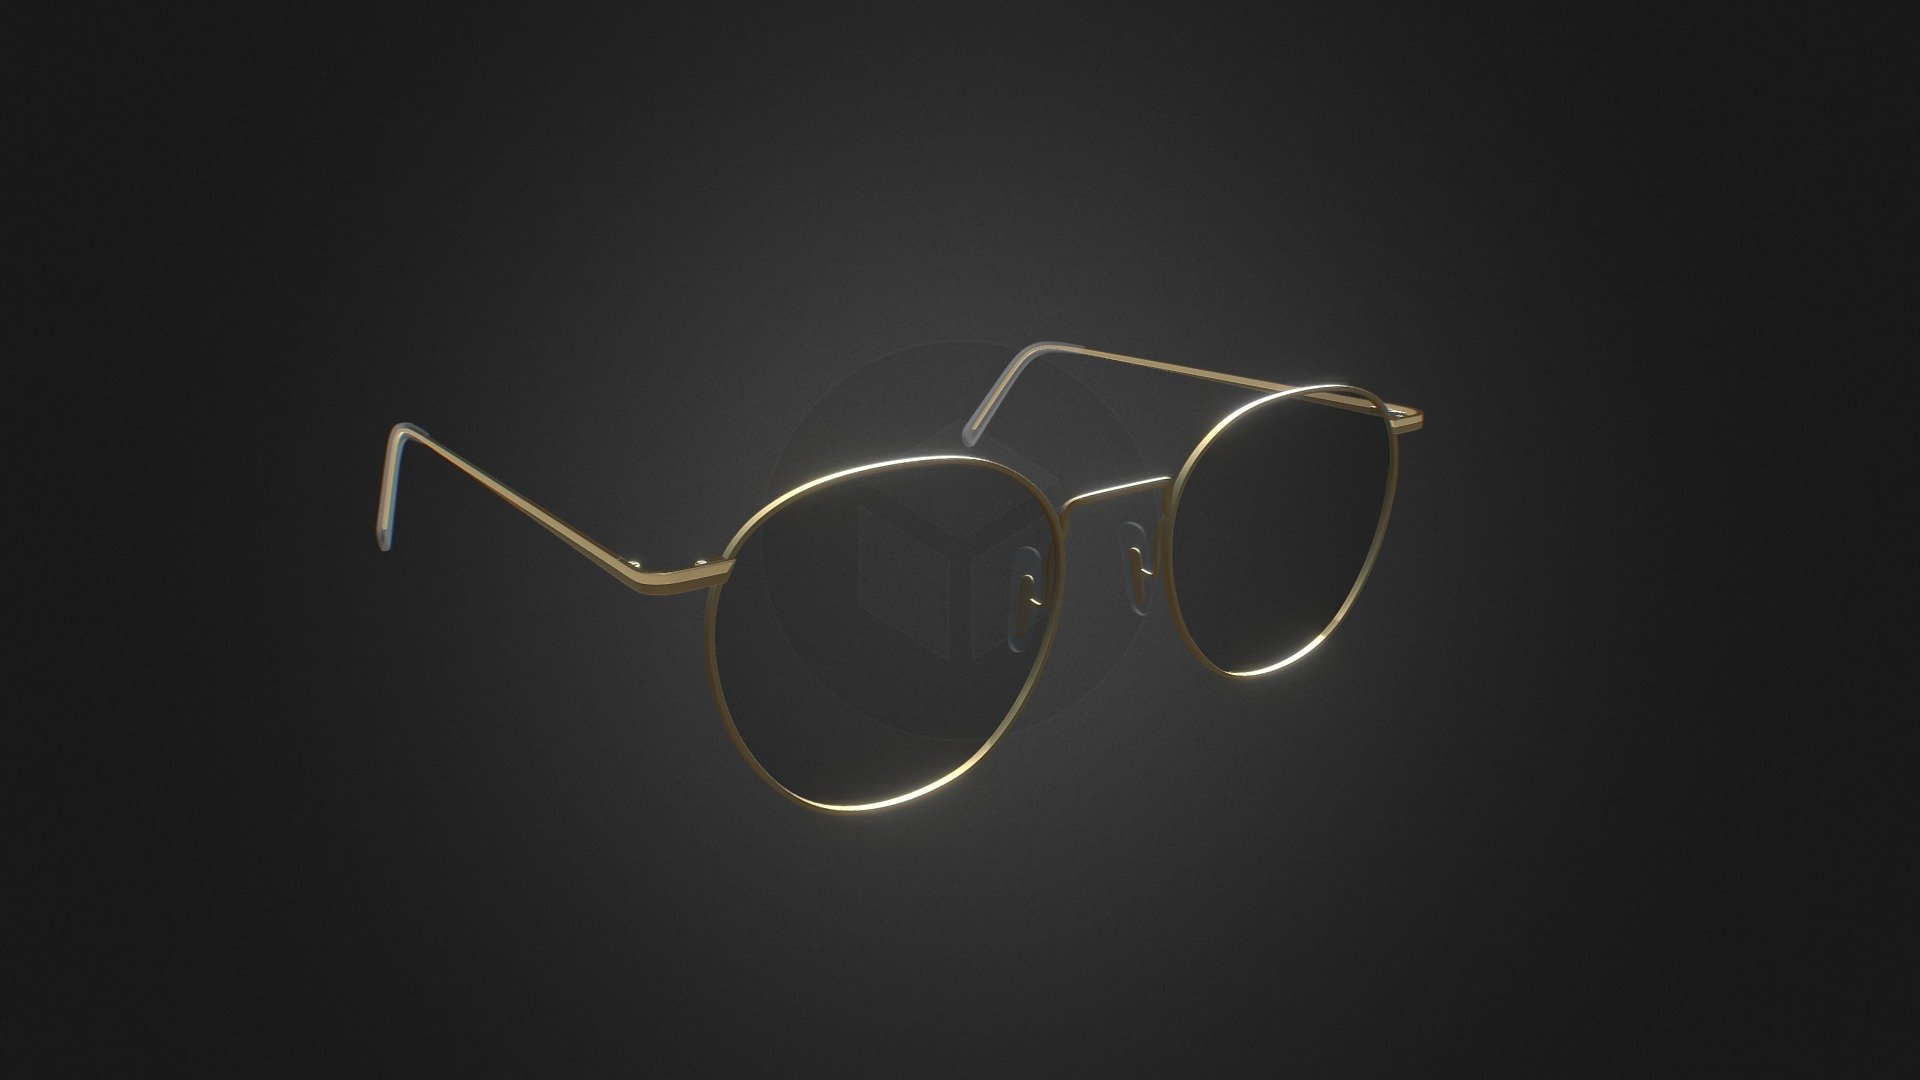 Sunglass Model - Neil Satin Gold Sunglass - Buy Royalty Free 3D model by Shoaib Ahmed (@cgdrops) 3d model